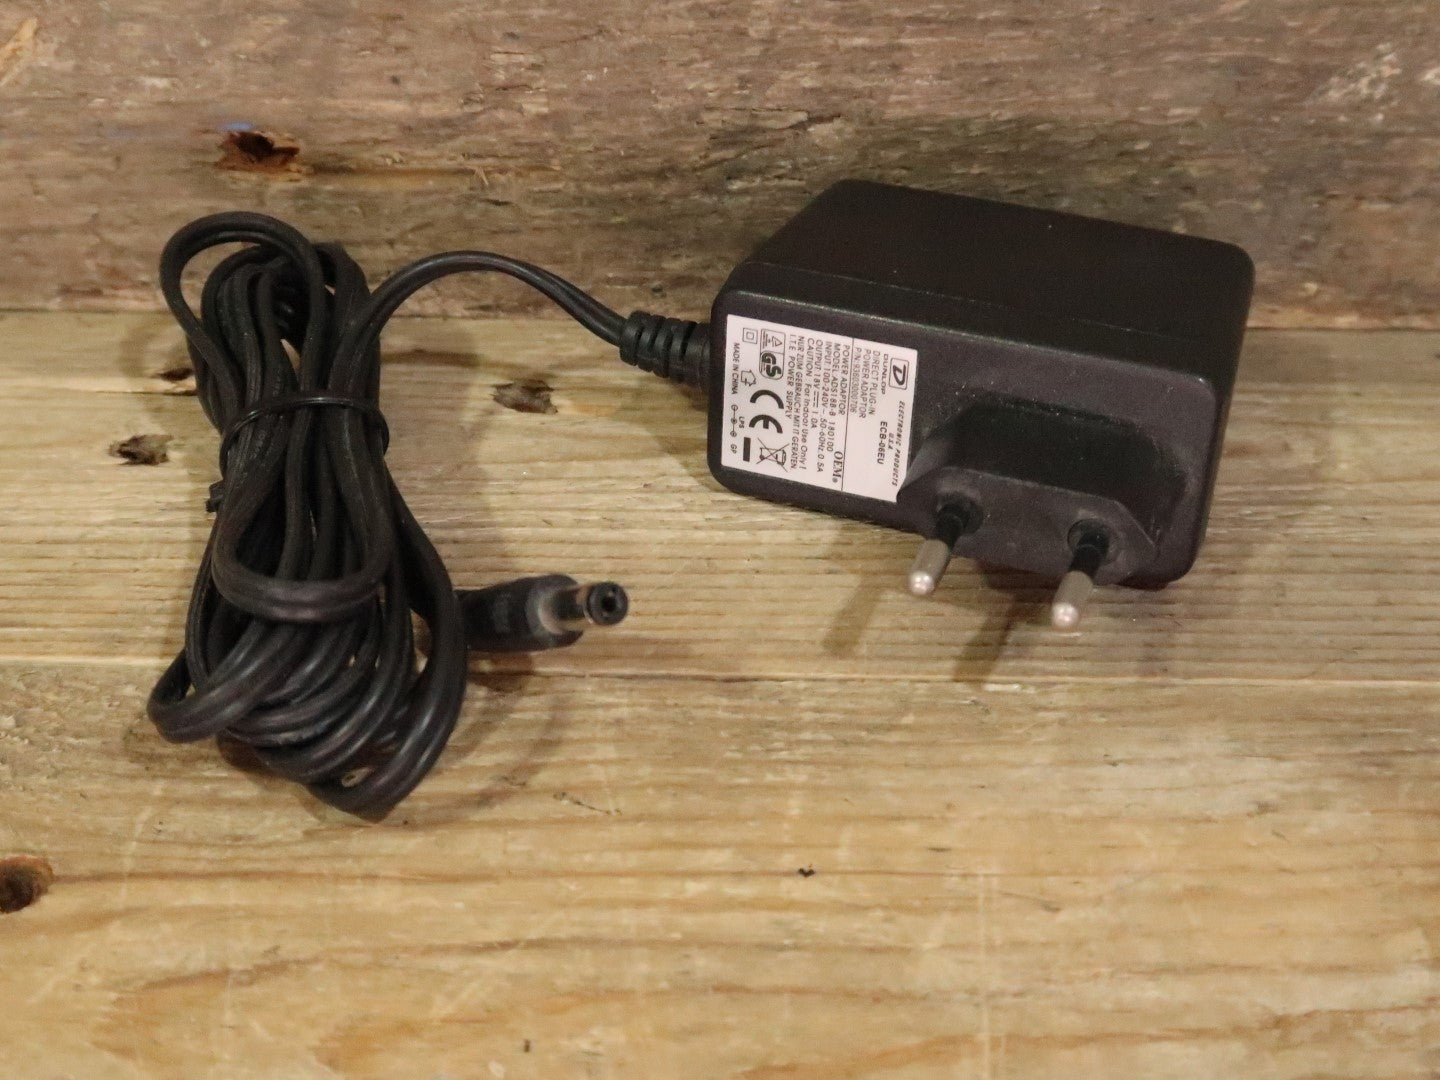 Dunlop DC-Brick Power Supply (9V and 18V, with Cables)